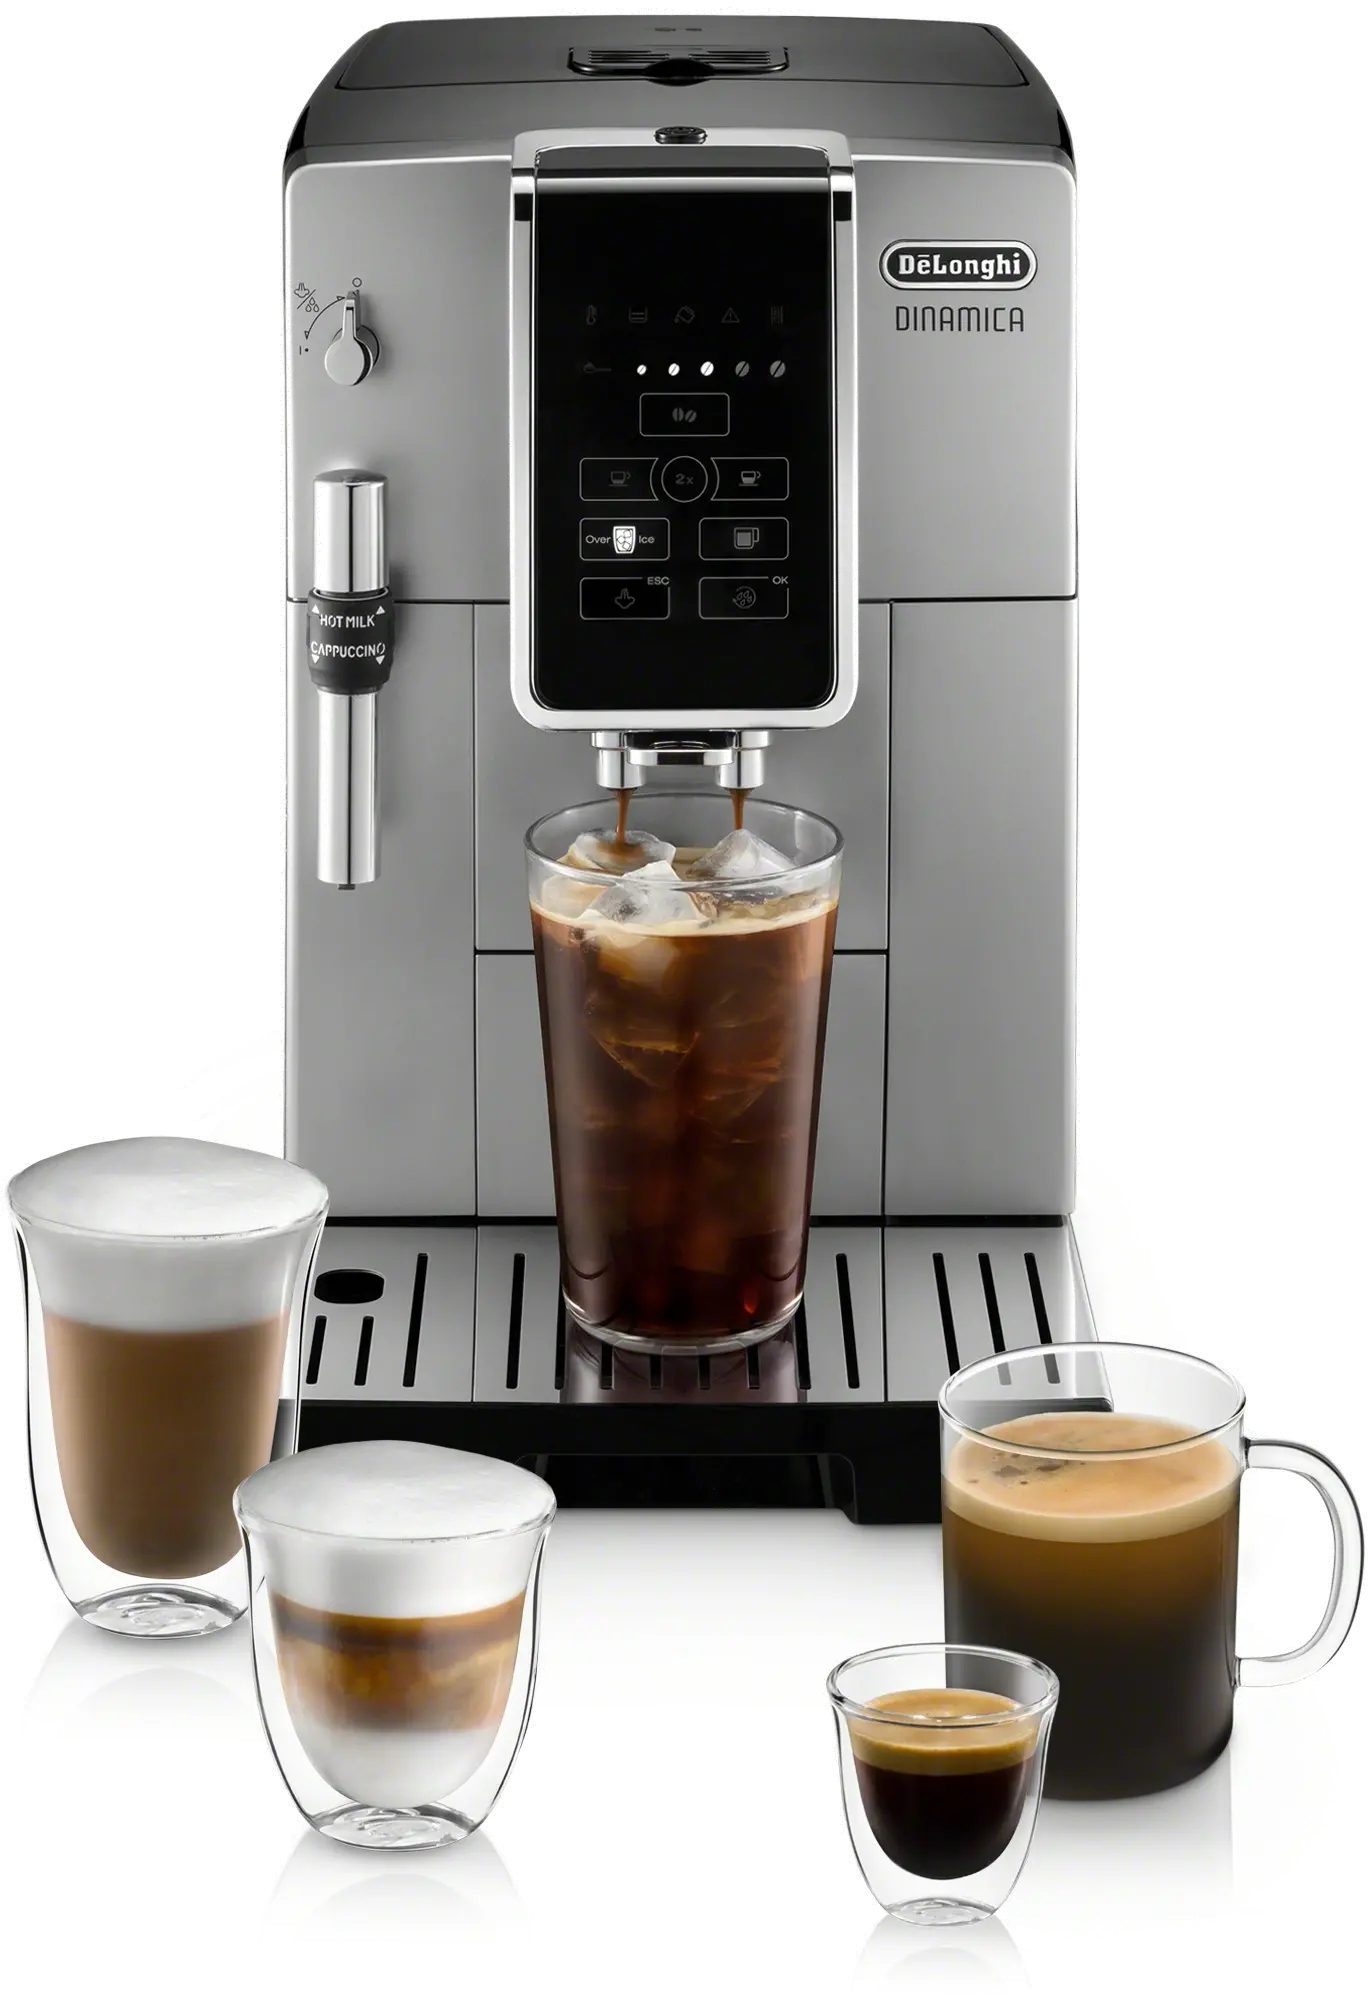 https://static.rcwilley.com/products/112930743/De-Longhi-Dinamica-TrueBrew-Over-Ice-Coffee-and-Espresso-Machine---Chrome-rcwilley-image1.webp